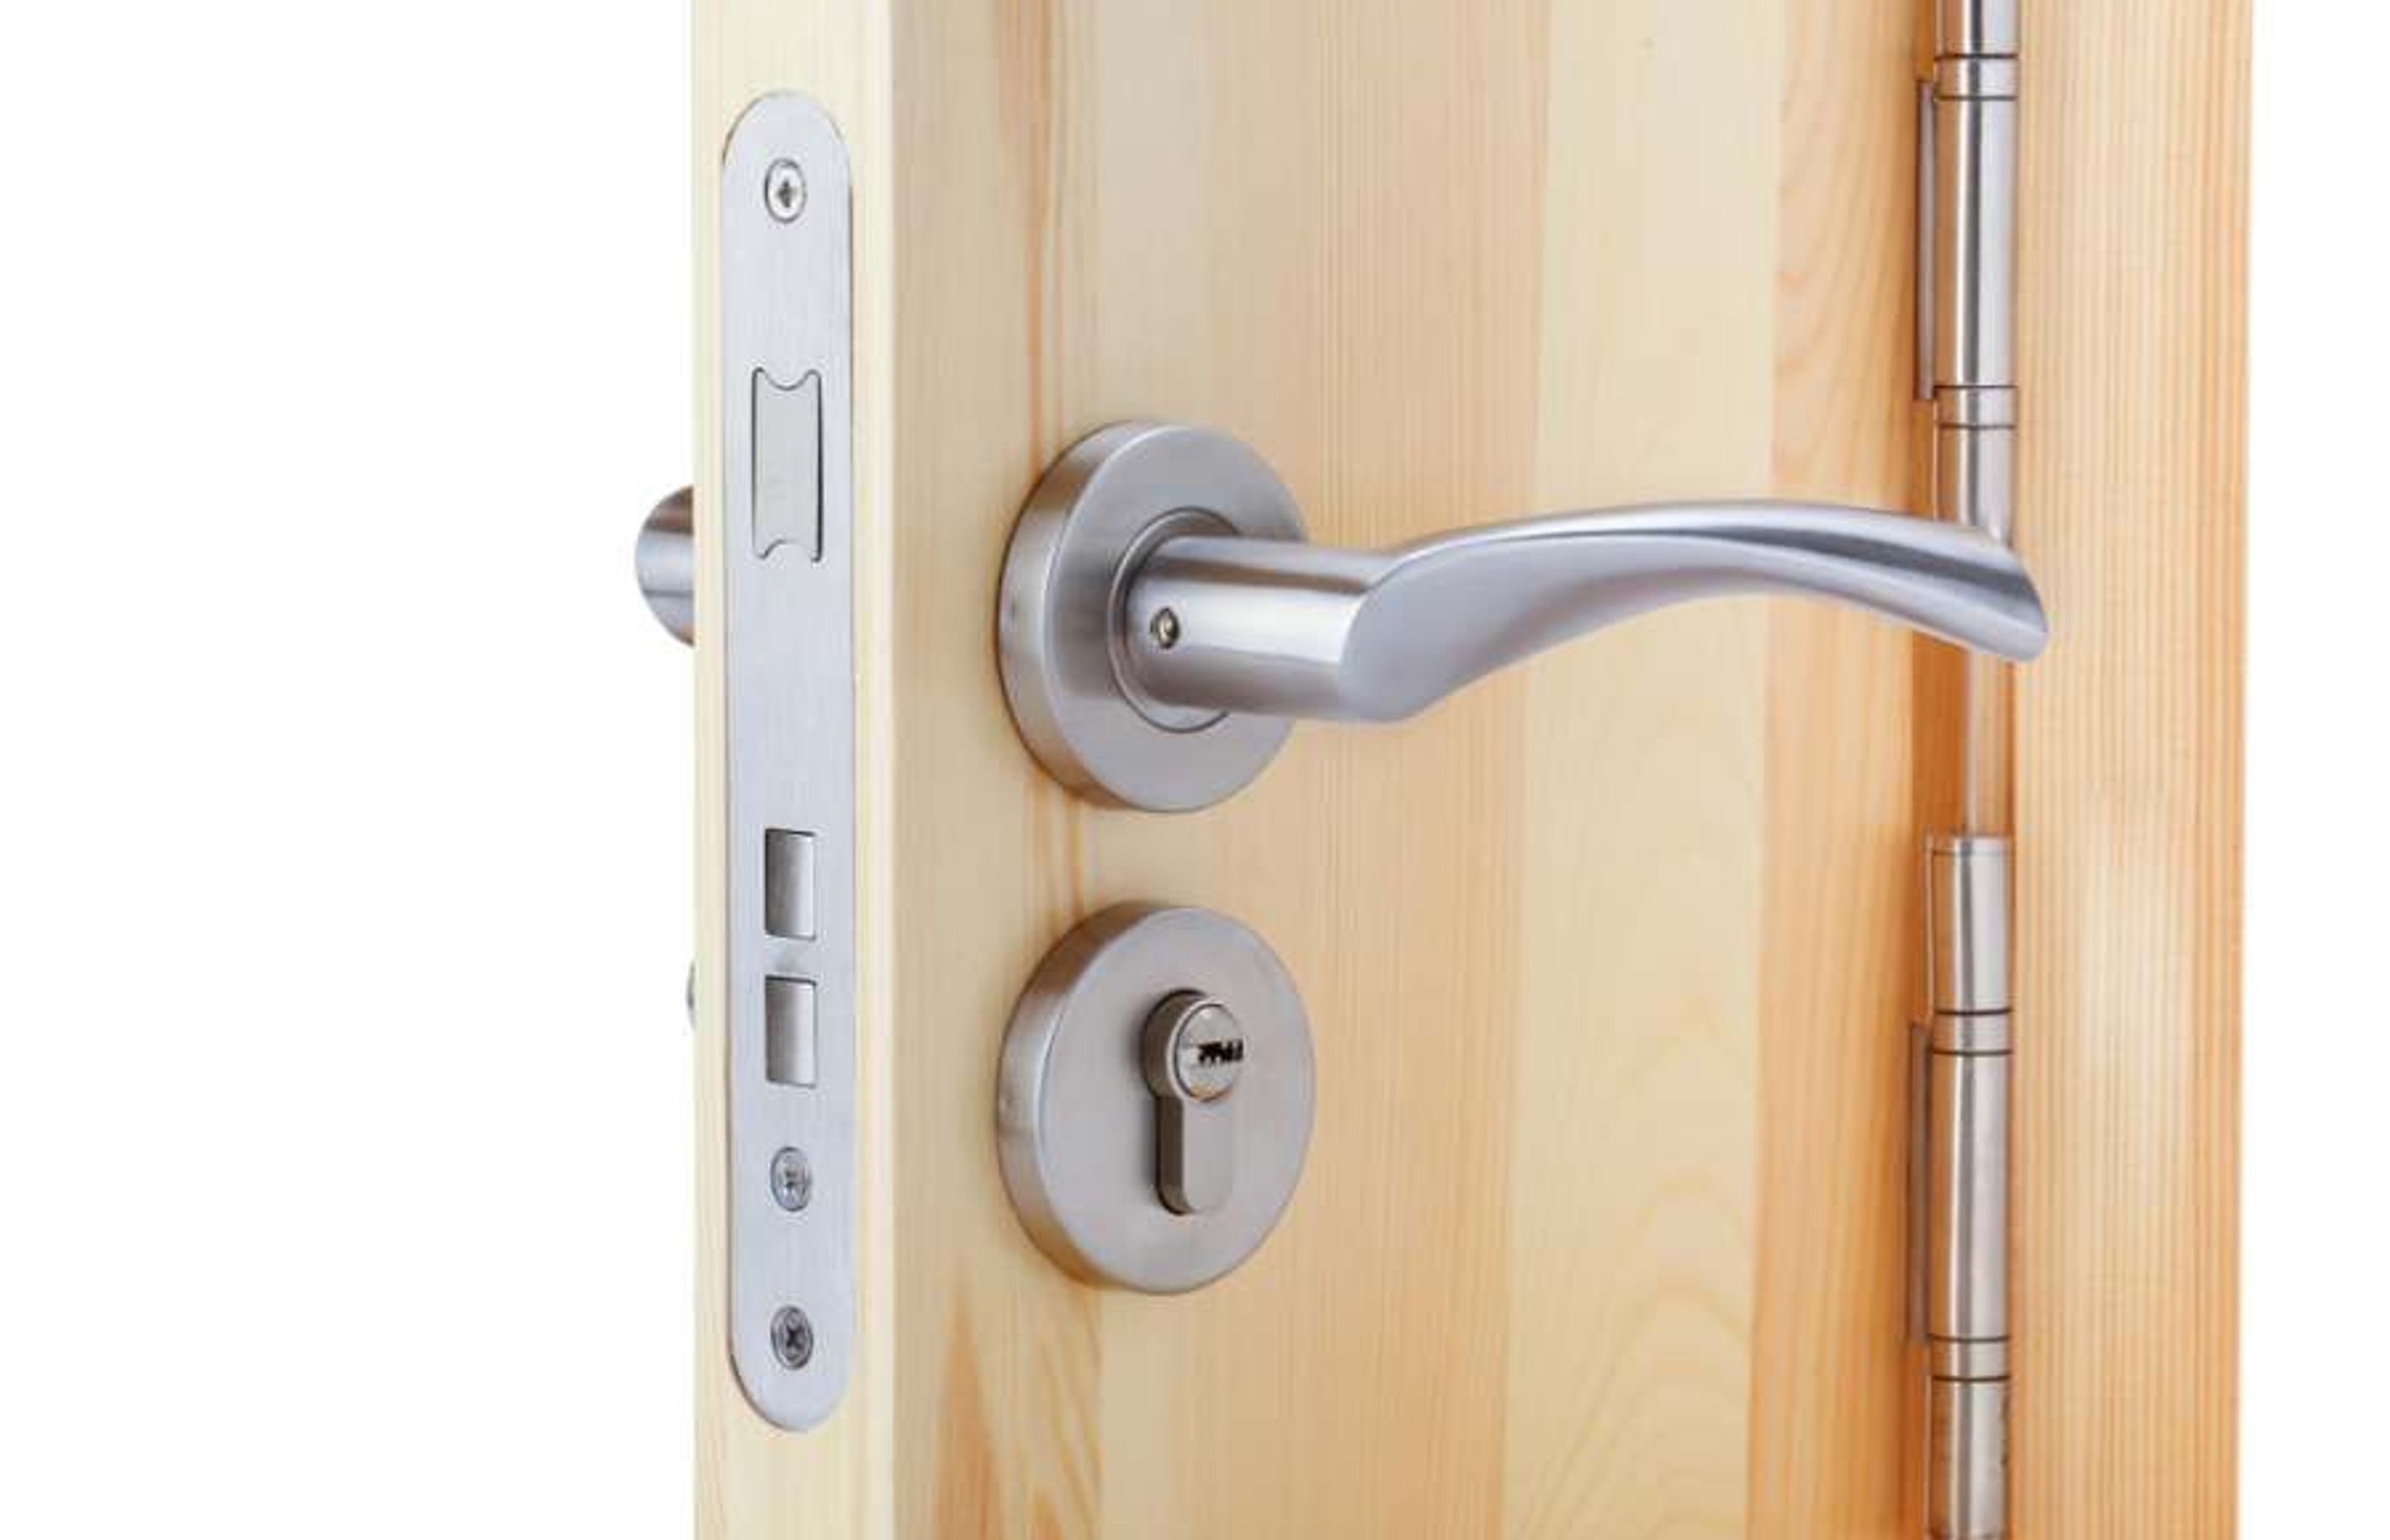 Choosing a front door lock: which one is right for your property?